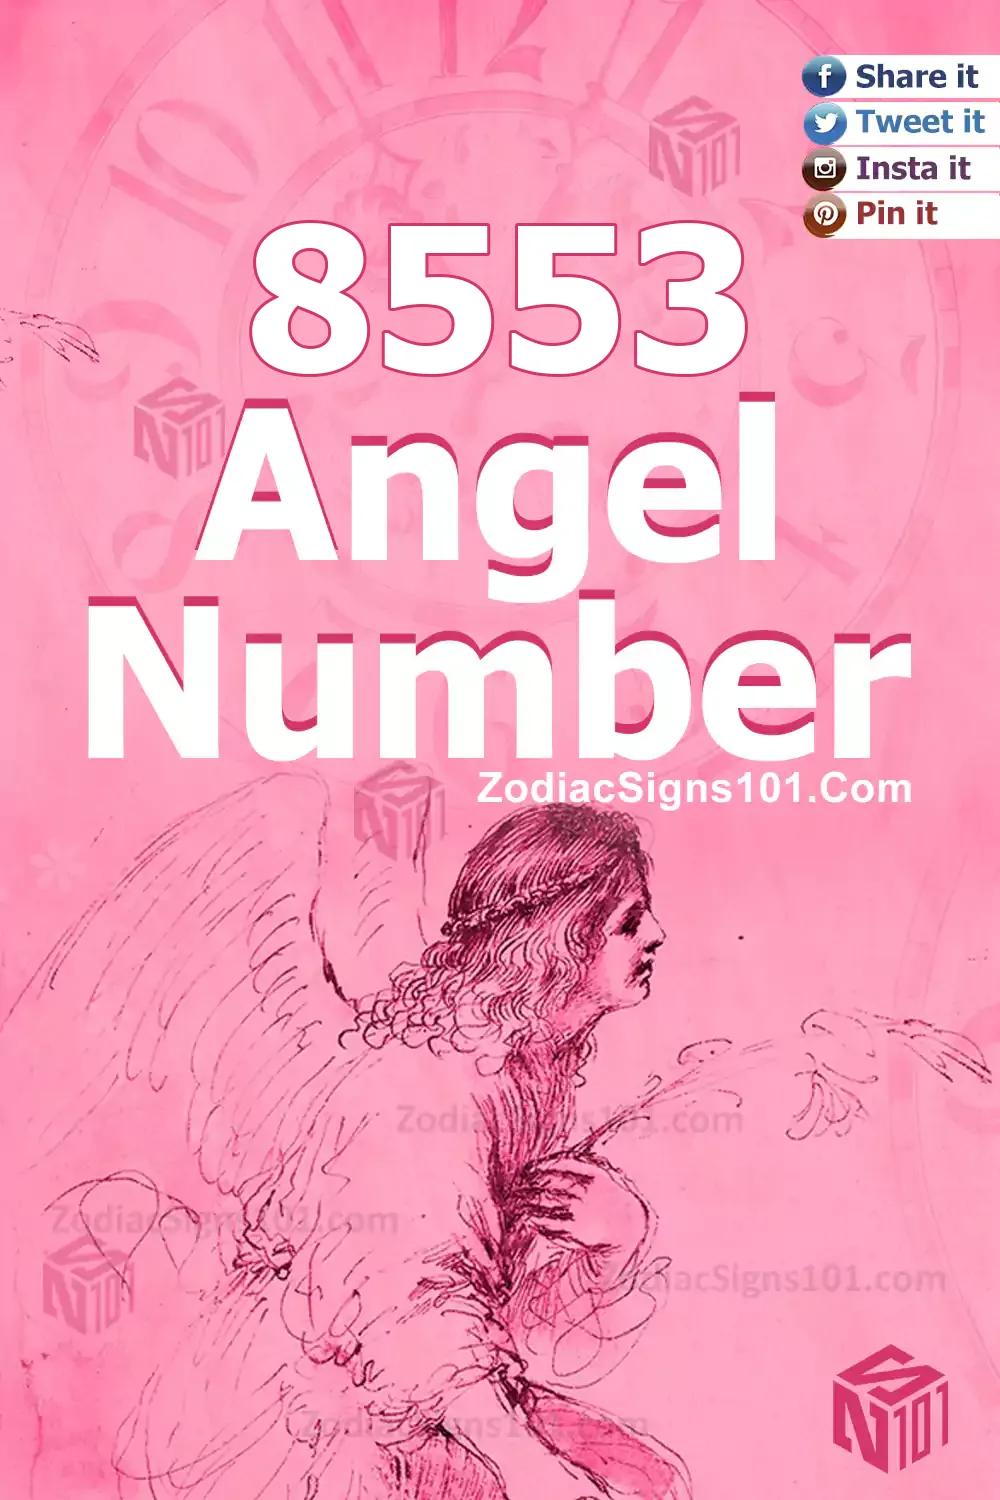 8553 Angel Number Meaning